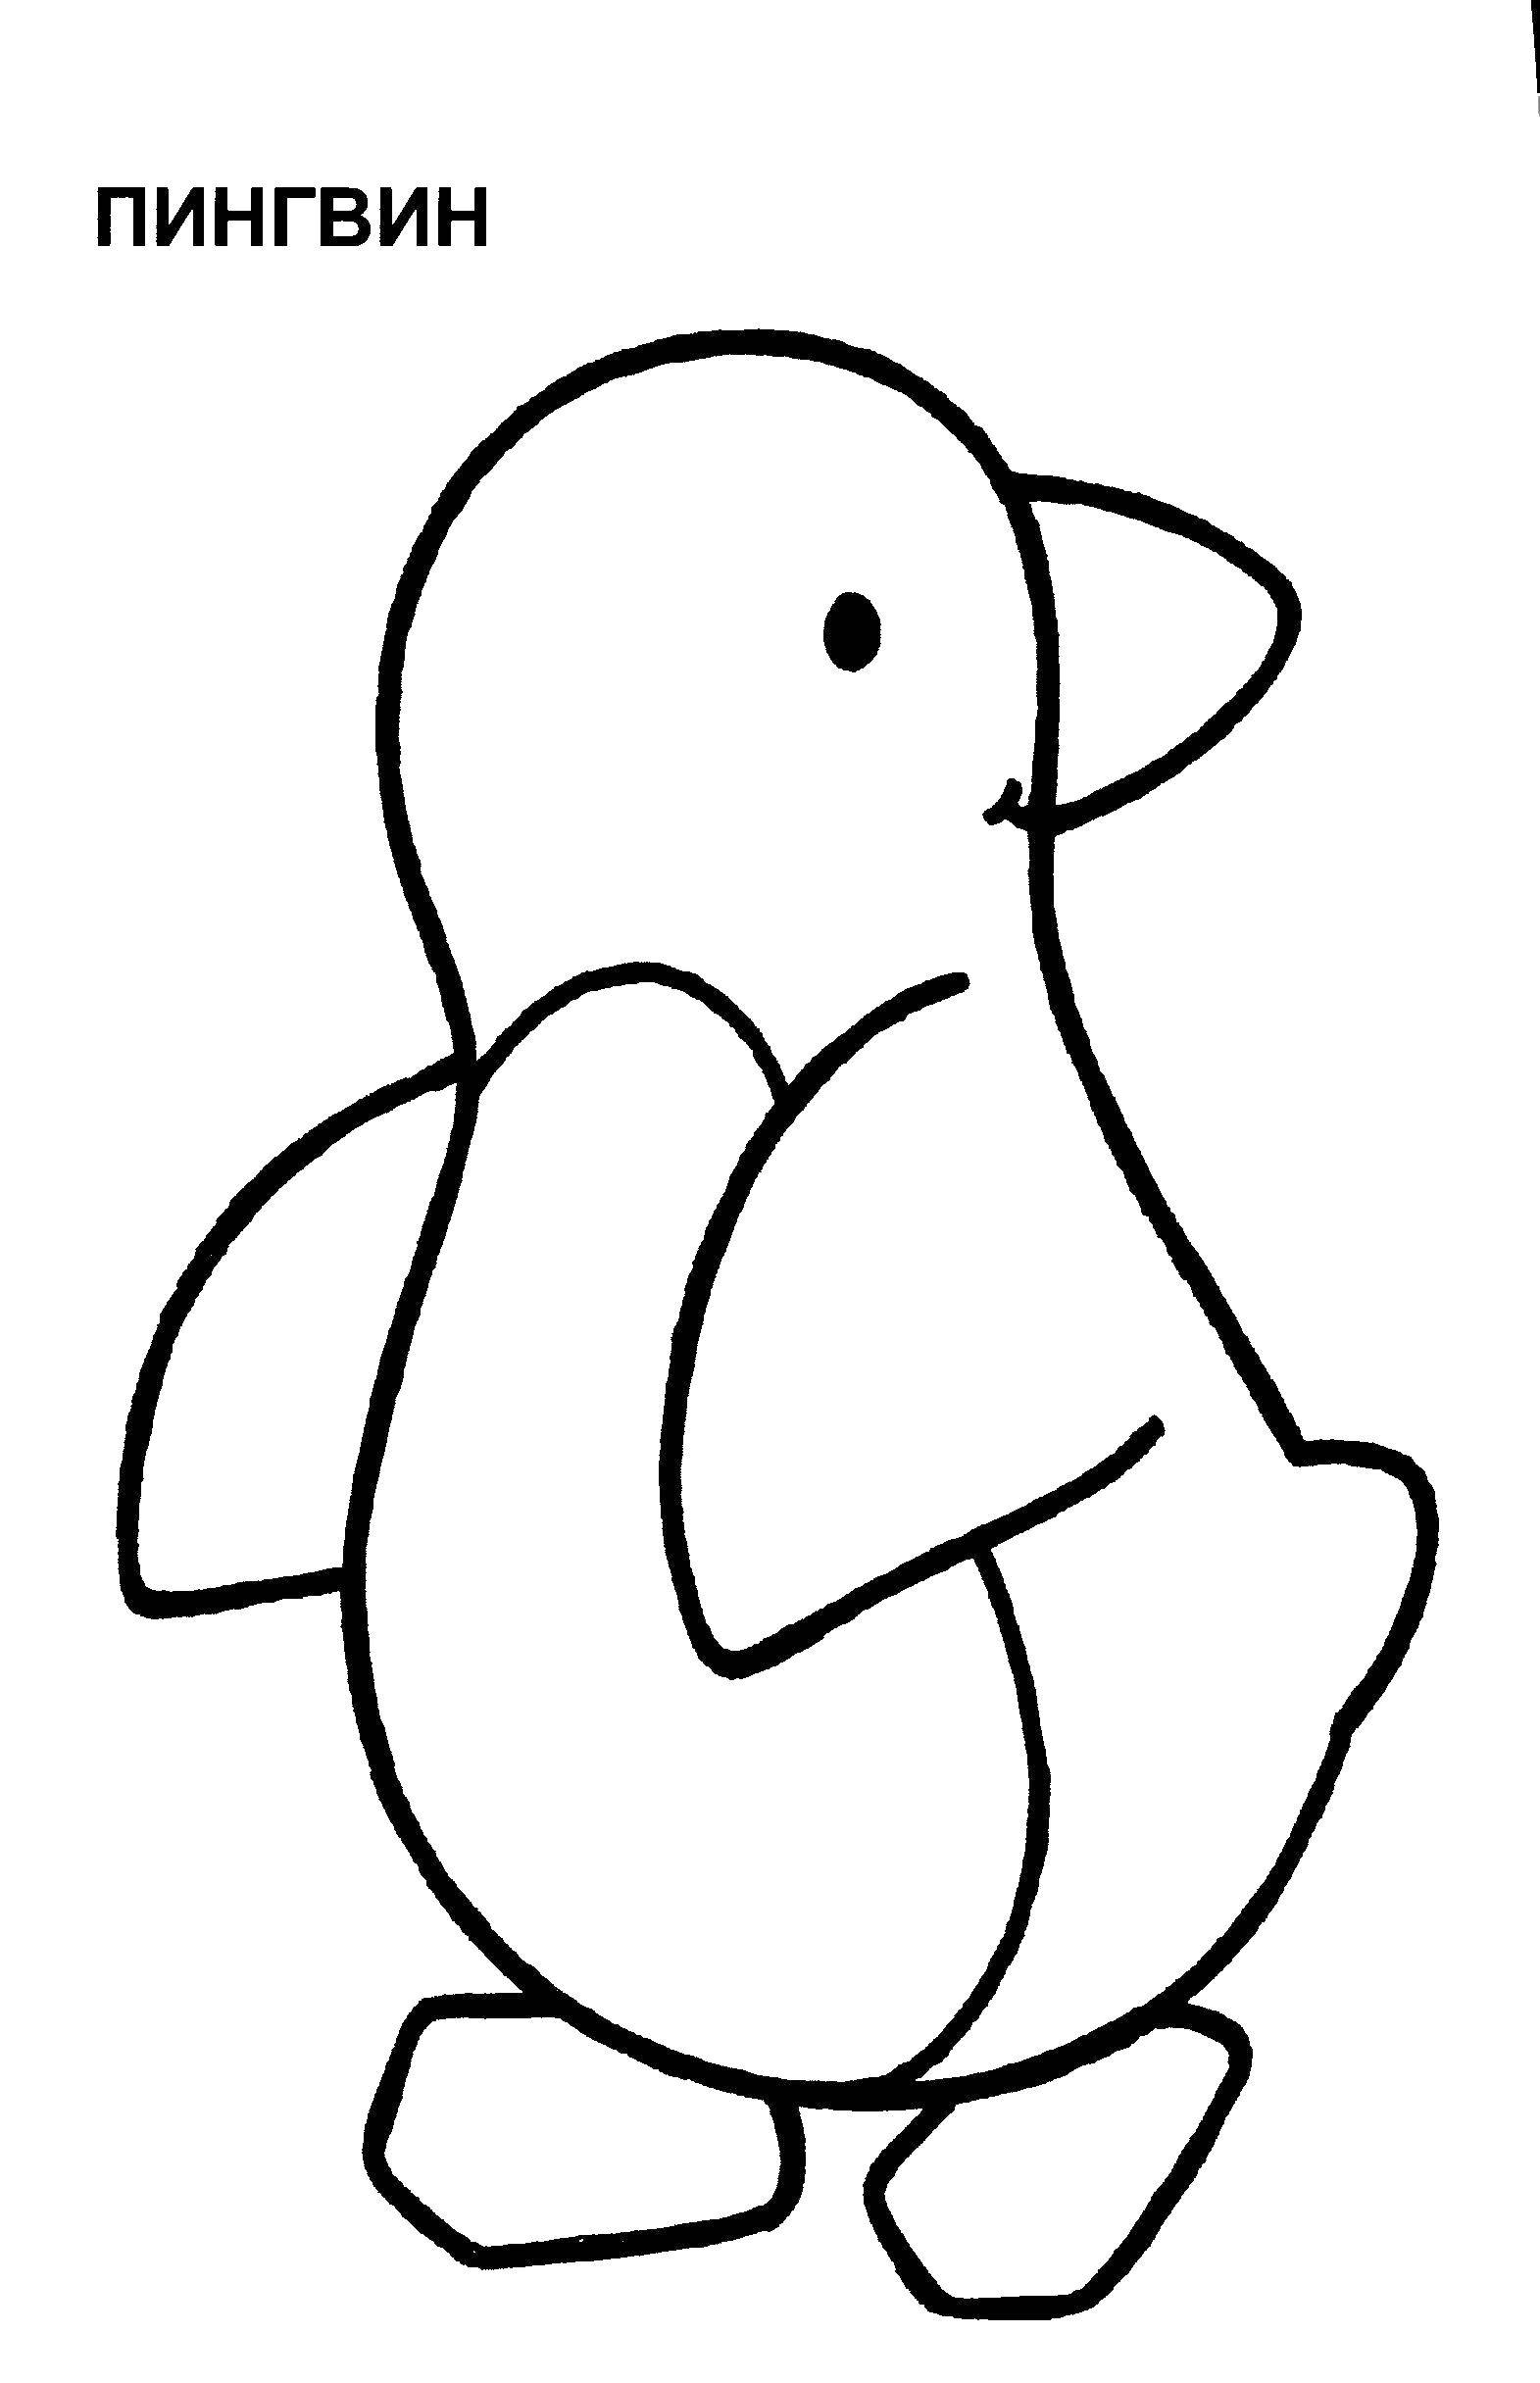 Coloring Penguin. Category Animals. Tags:  The penguin.